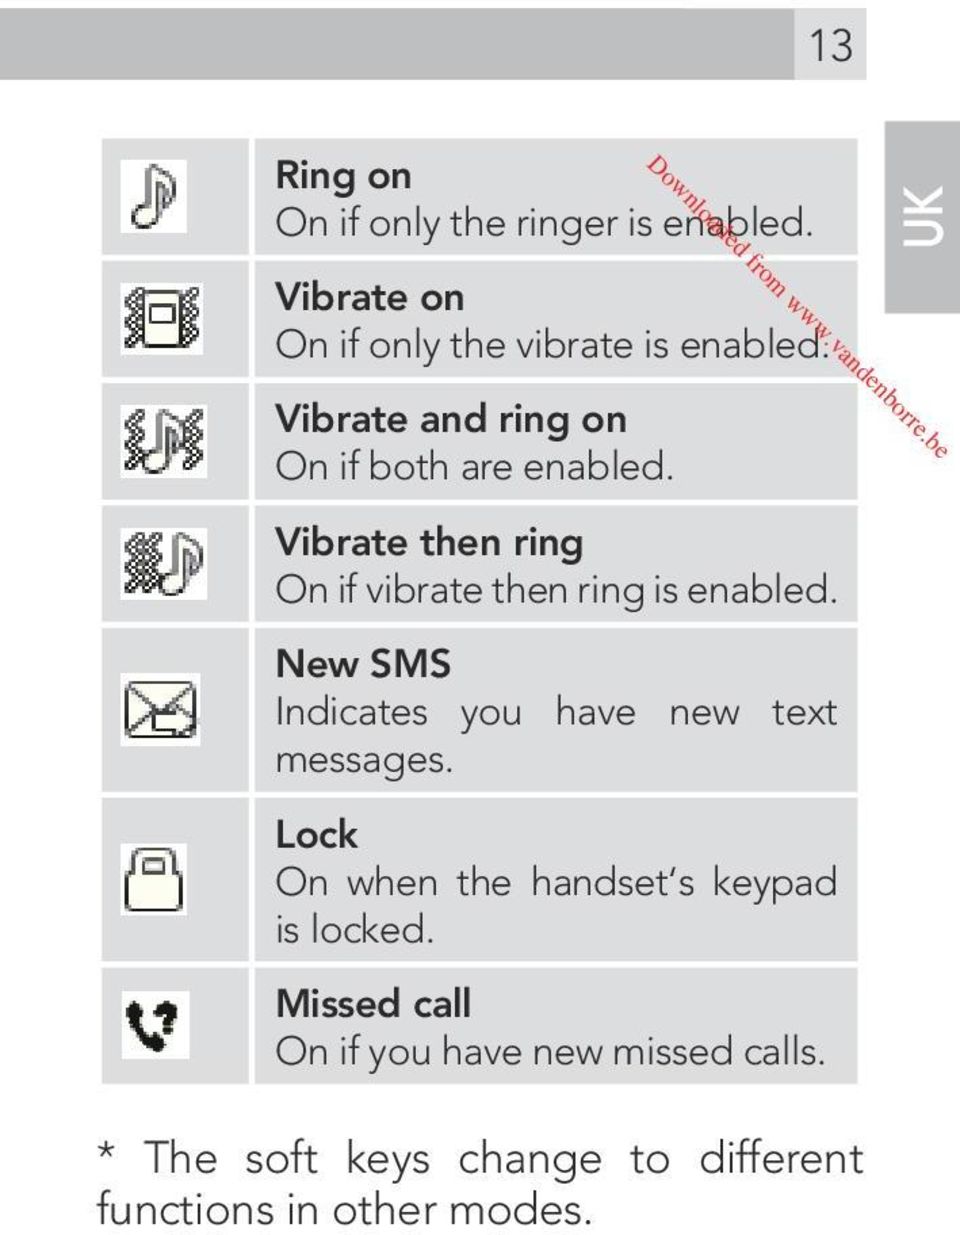 New SMS Indicates you have new text messages. Lock On when the handset s keypad is locked.